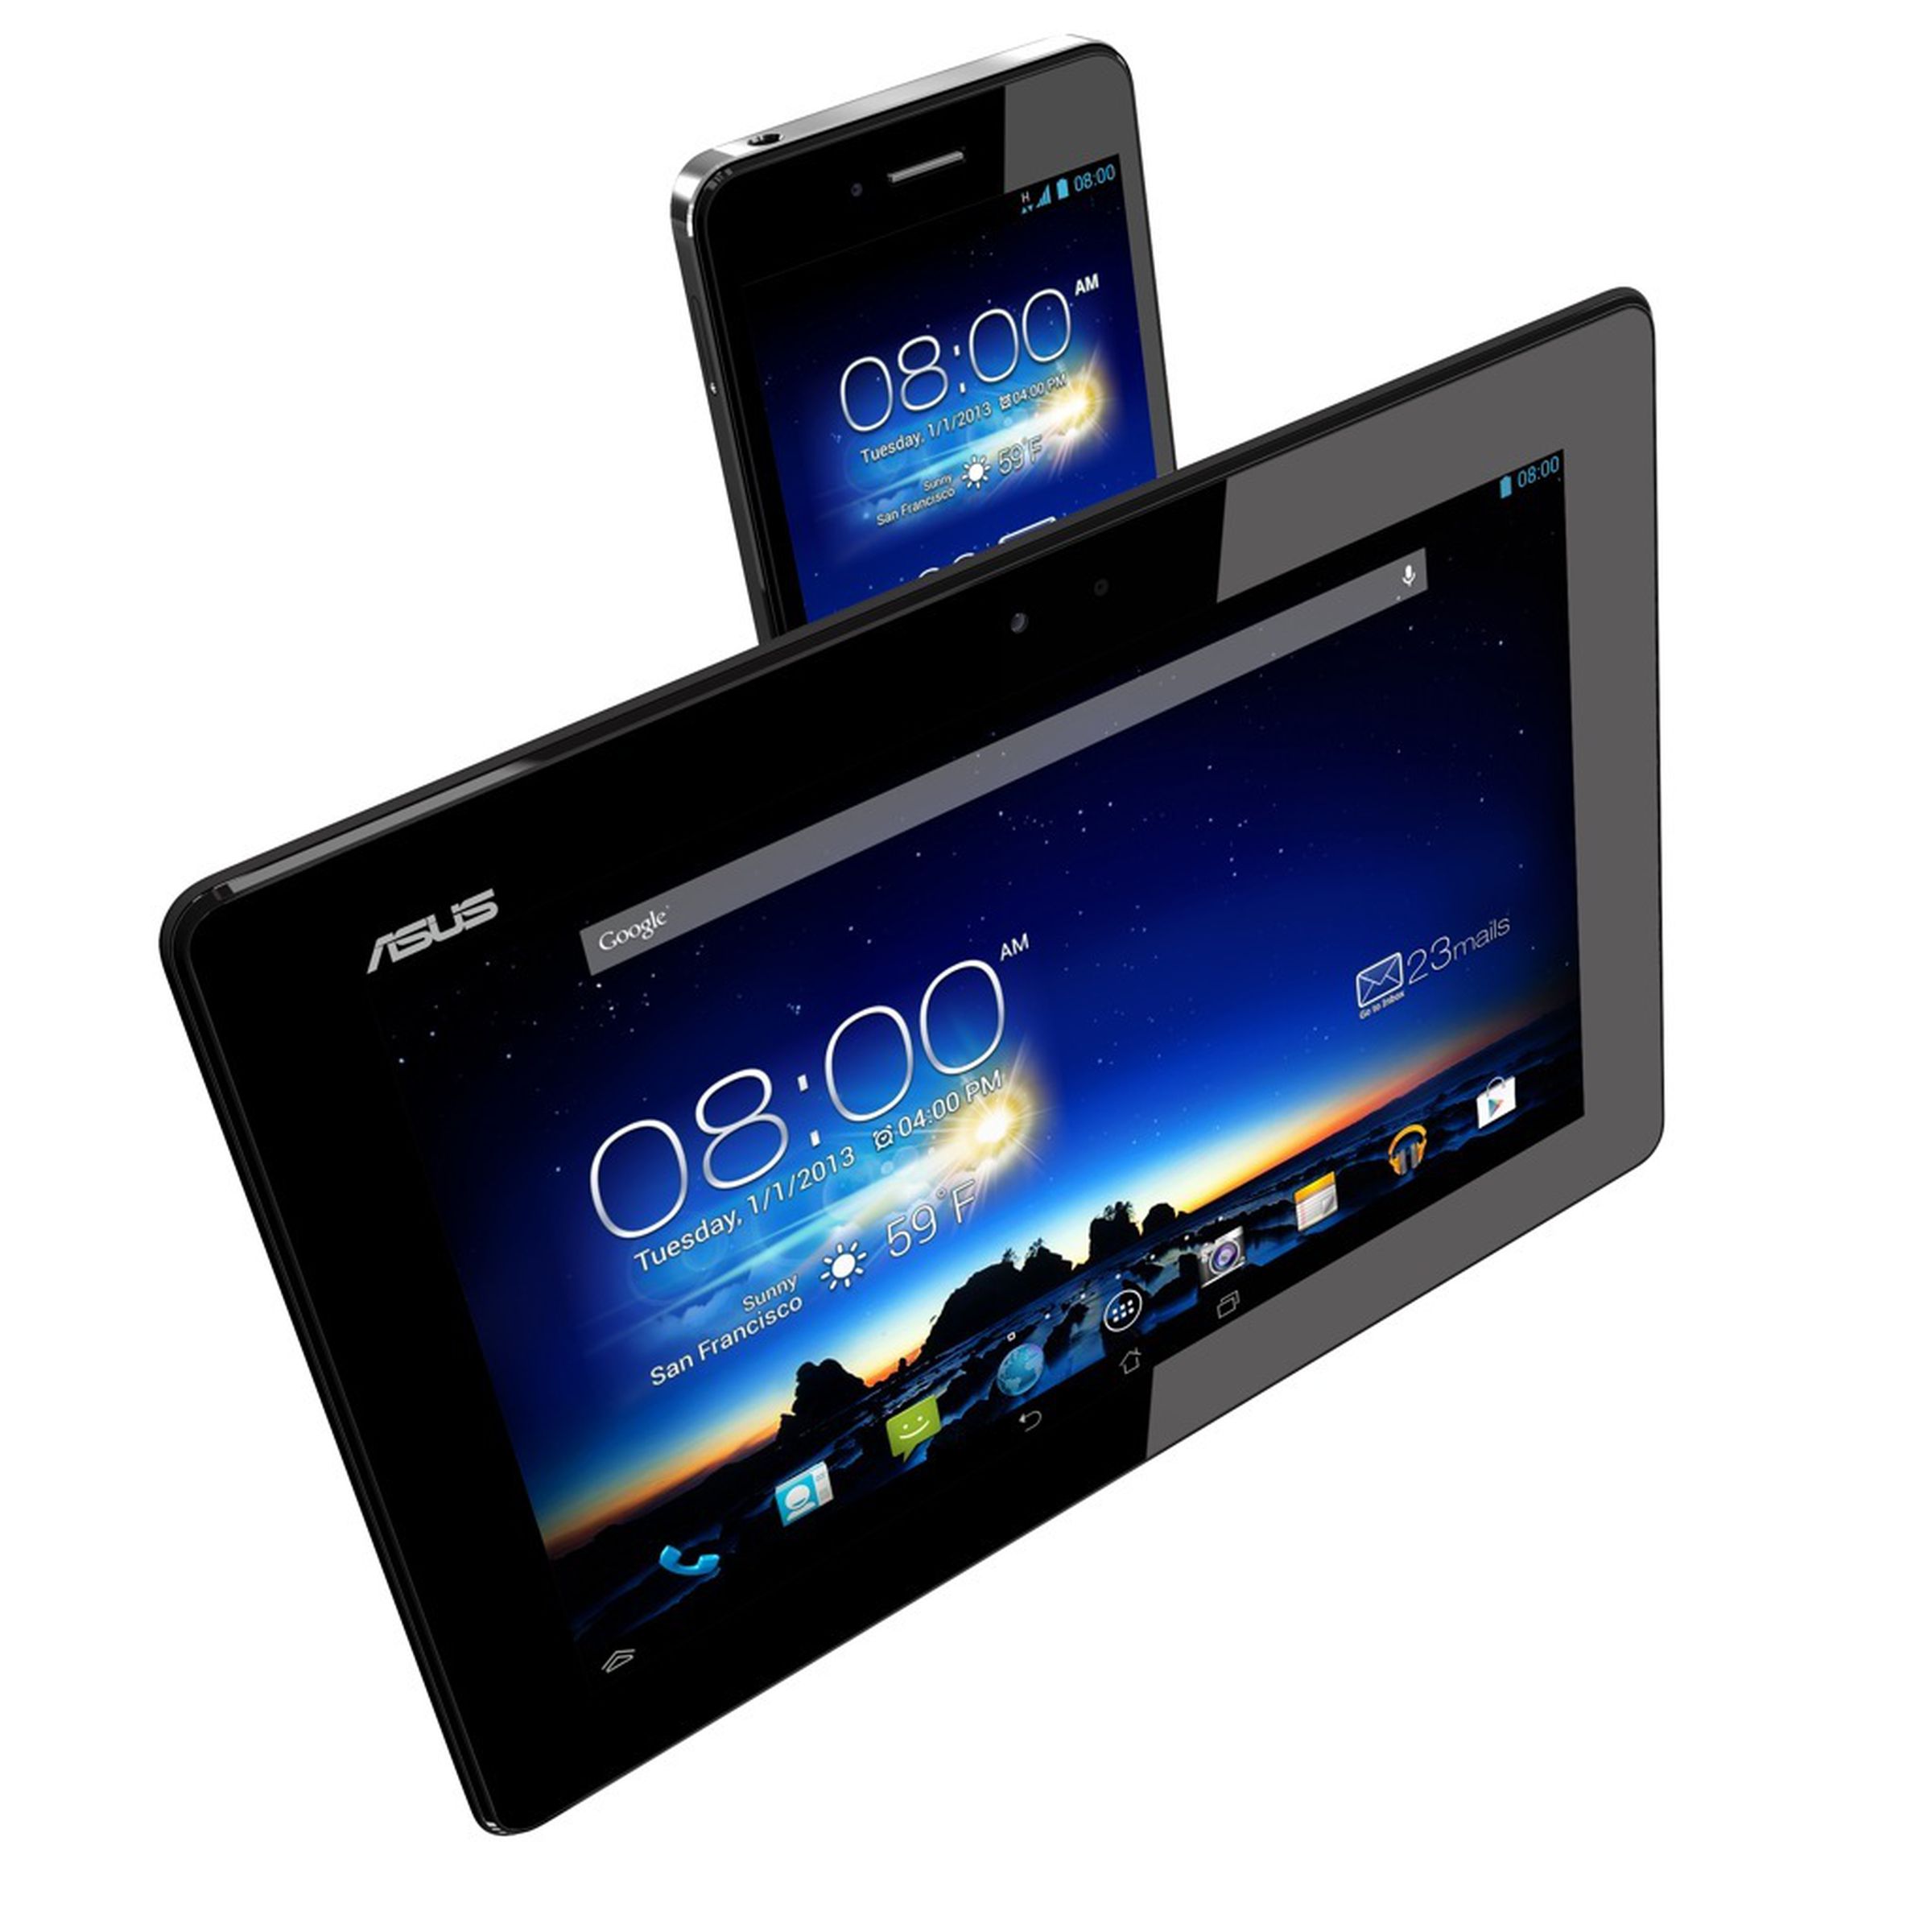 Asus Padfone Infinity press pictures